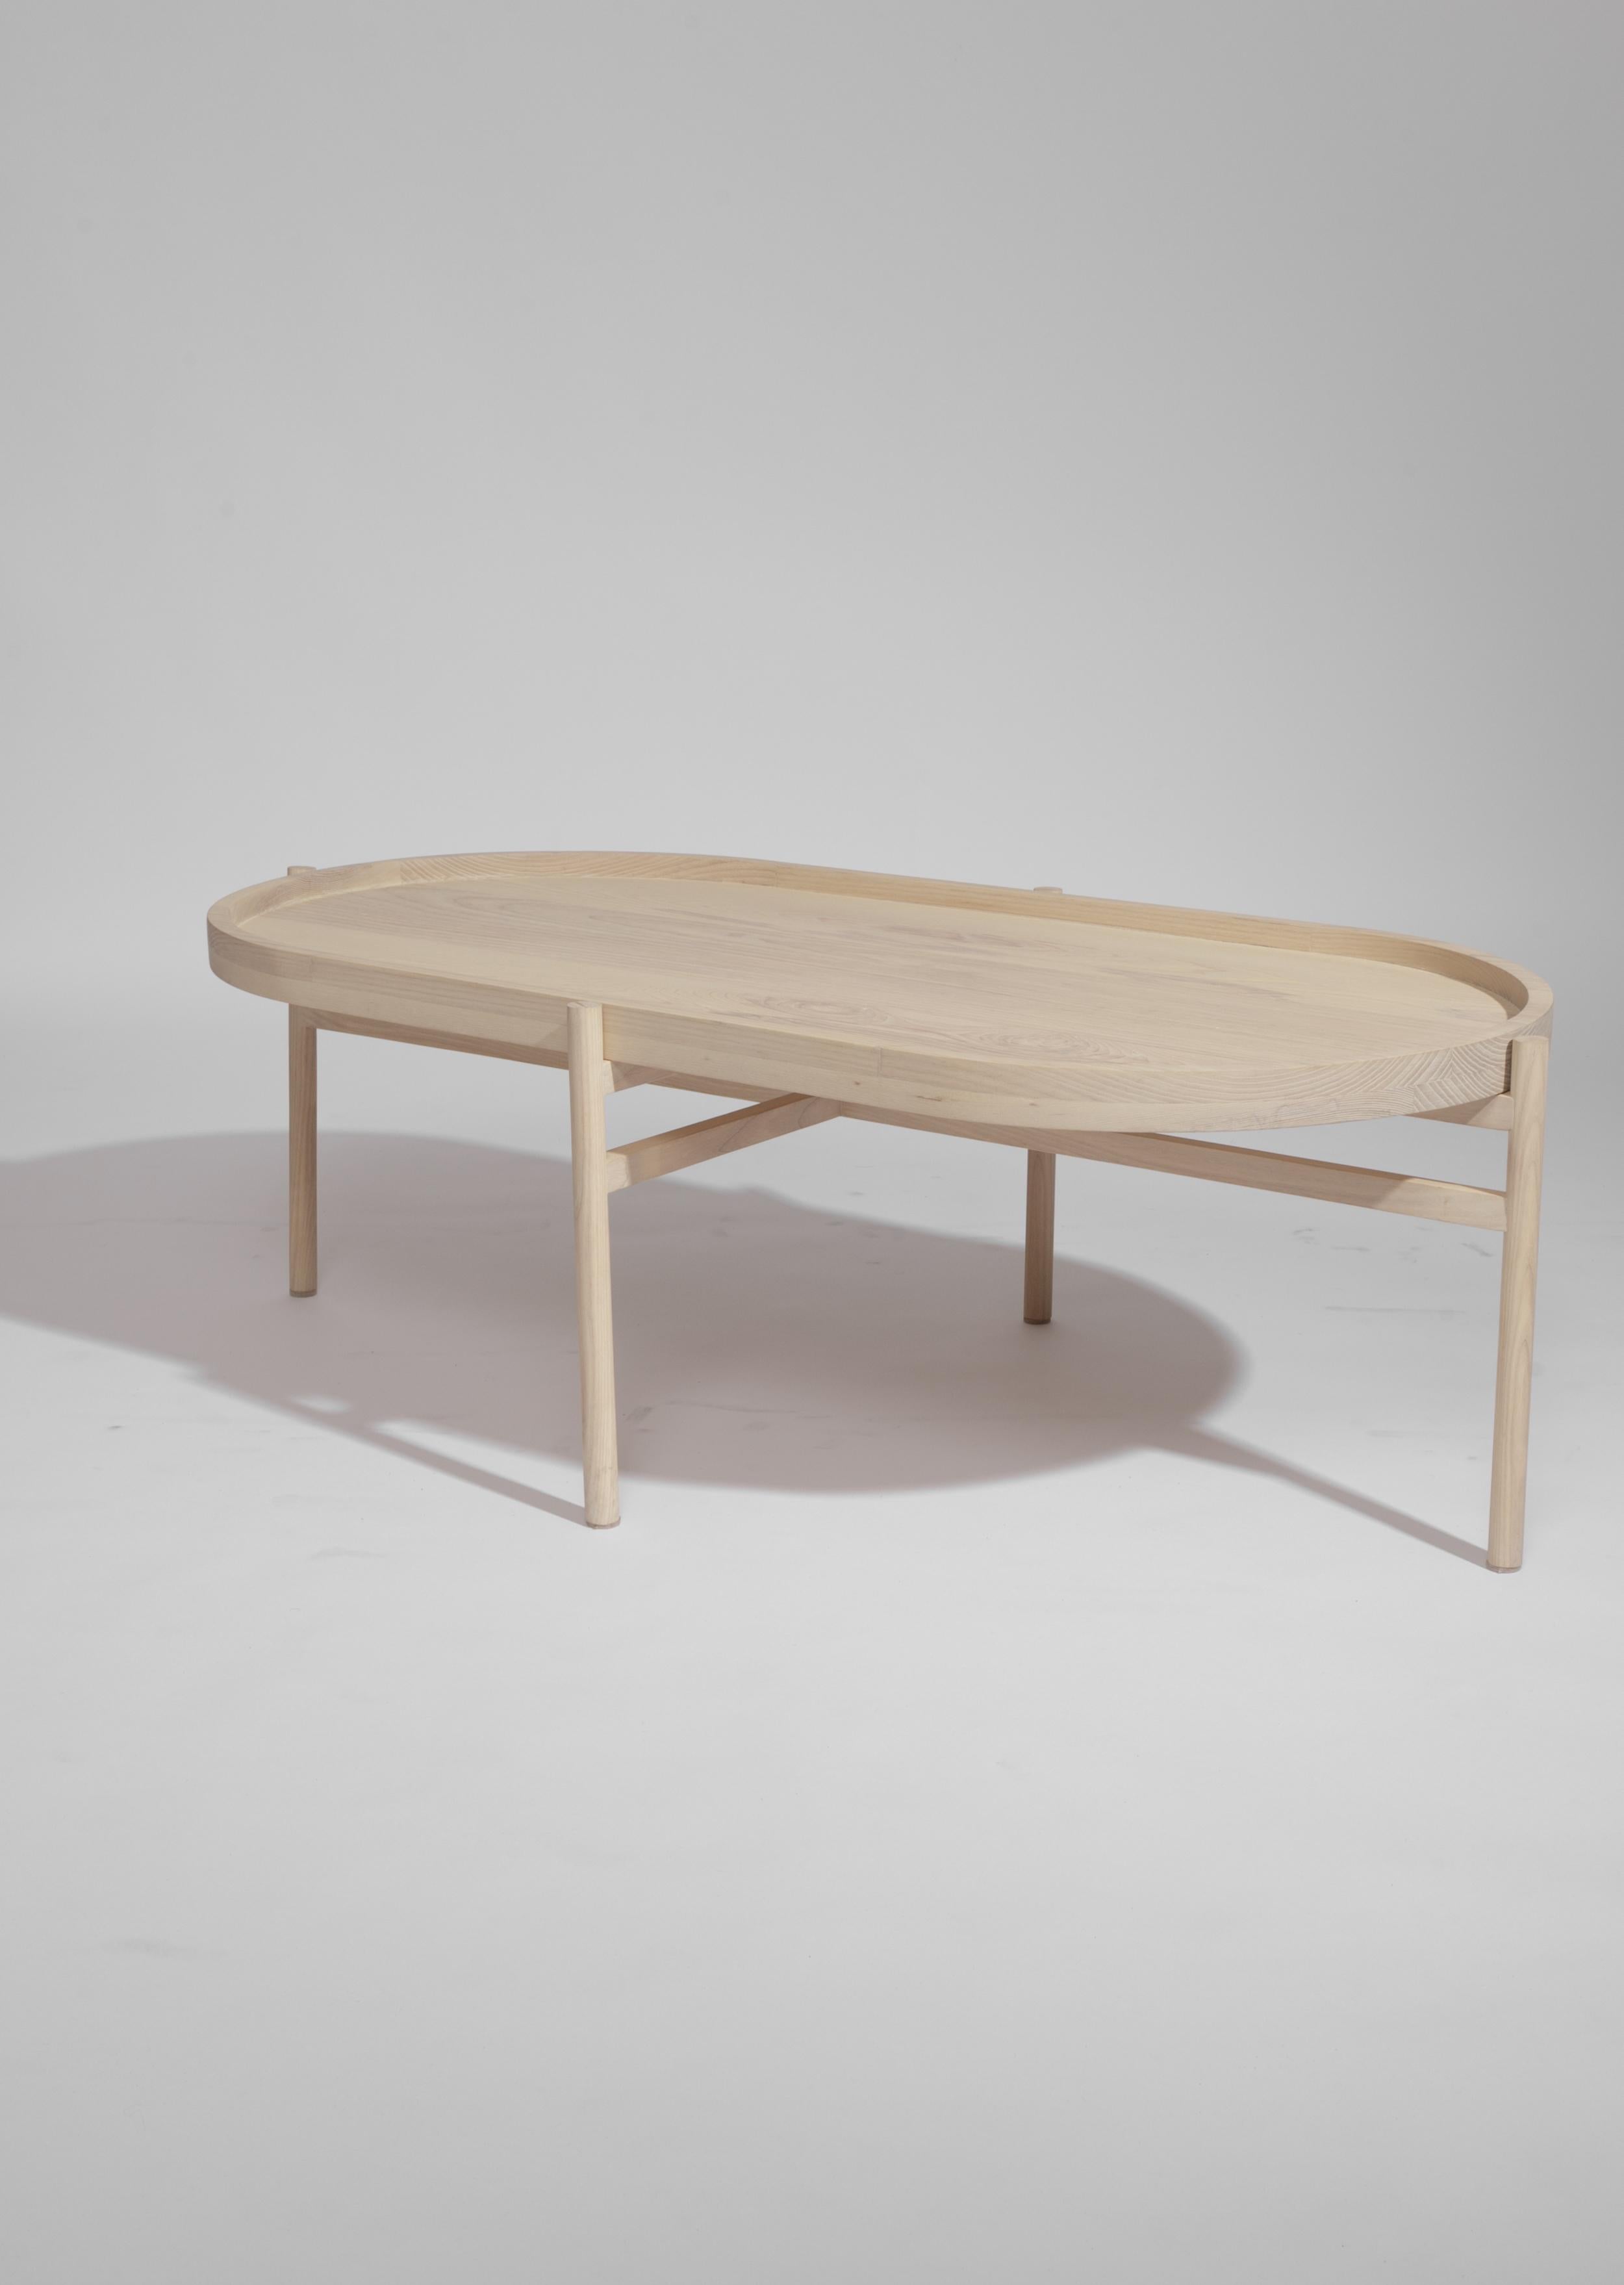 The Mar coffee table, with contemporary style, was designed from the interaction and conversation that arise around a central table. This piece of furniture was born to smooth the interaction between the people around the table. Its solid wood